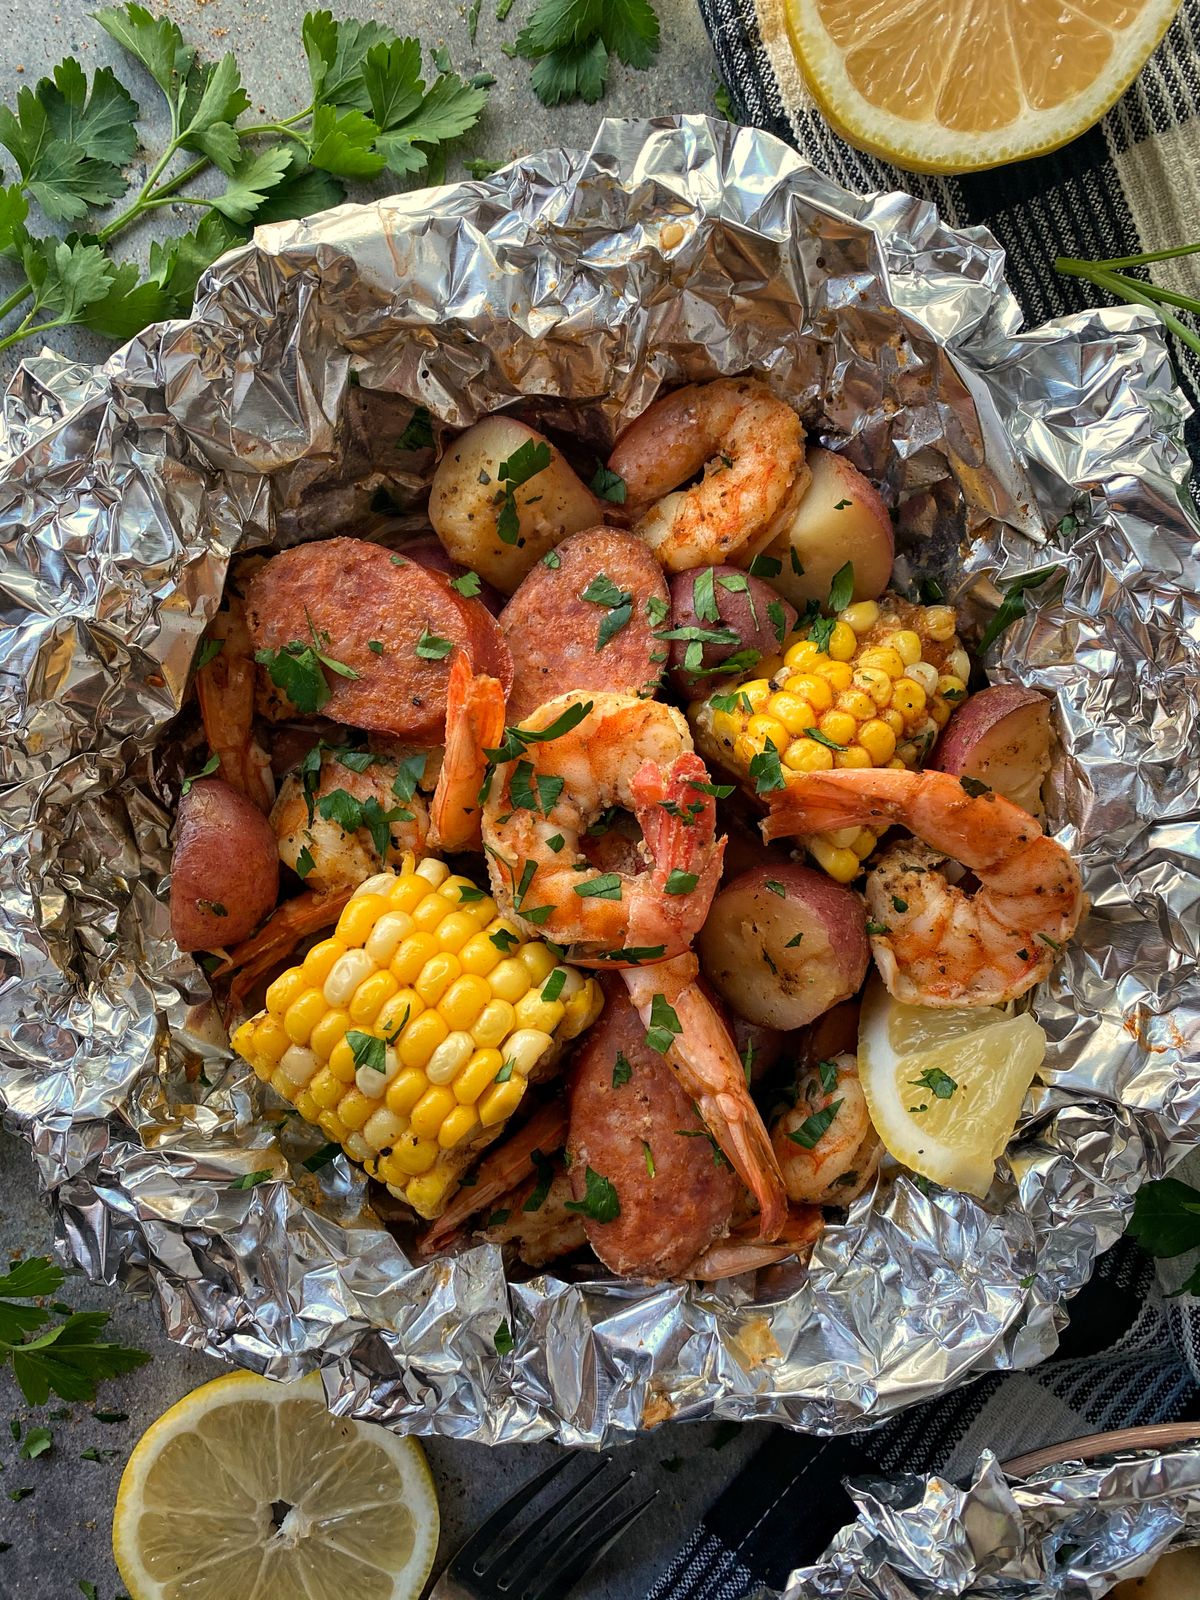 A variety of seafood and vegetables can be used in this recipe for foil packets.  (Audrey Alfaro/For The Spokesman-Review)